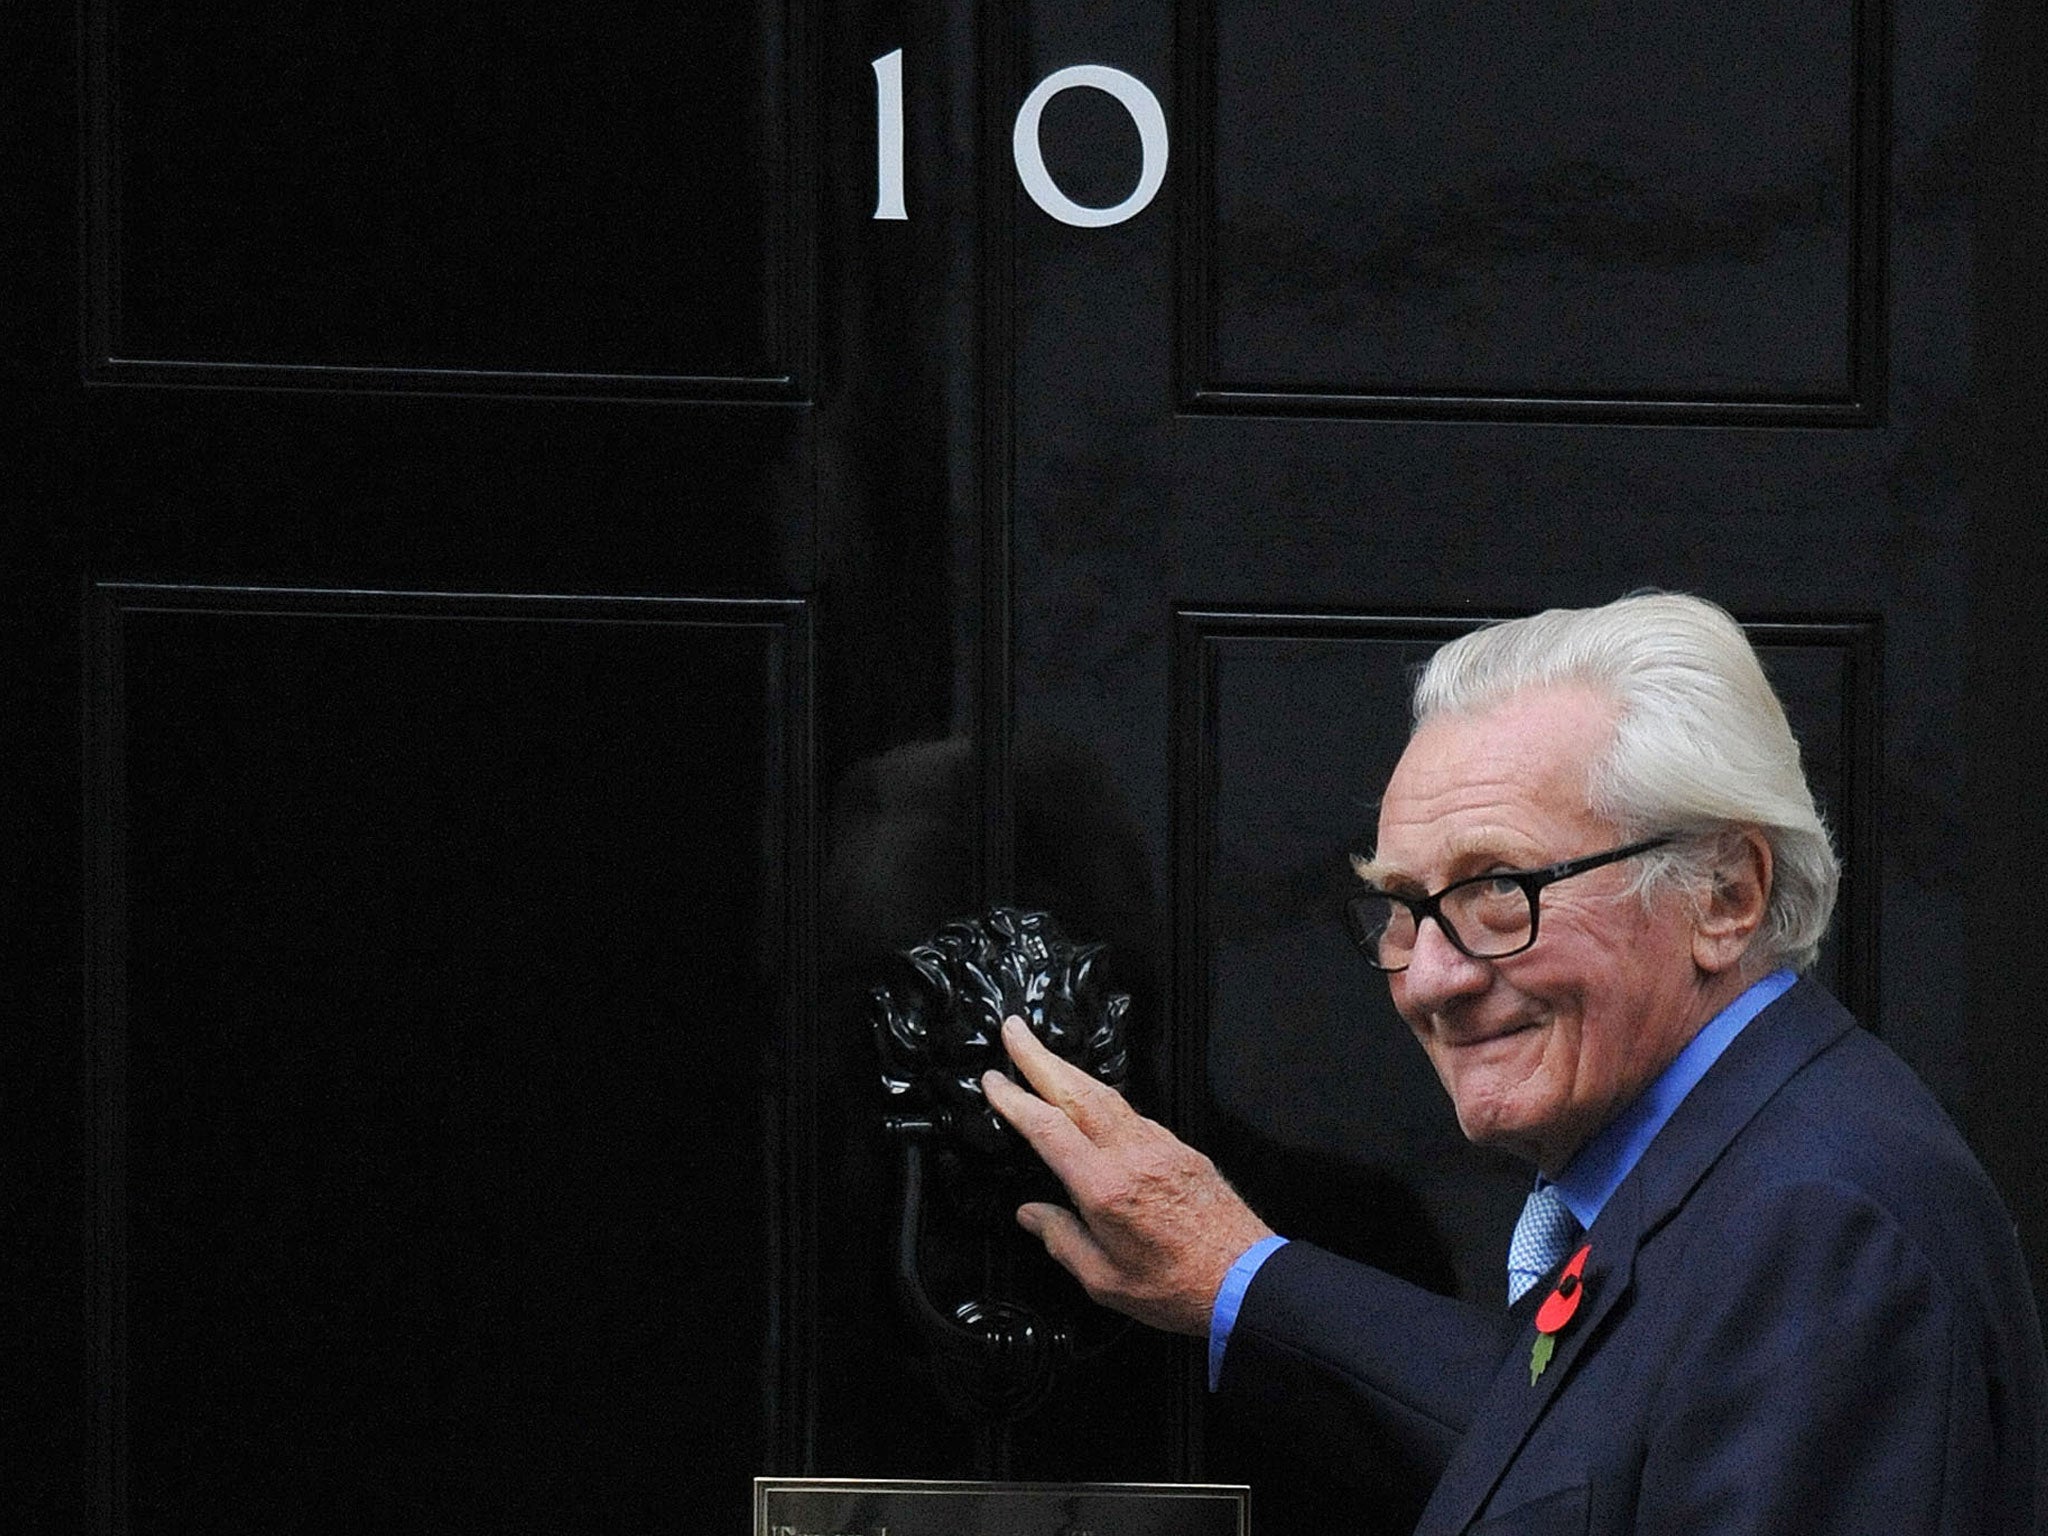 Lord Heseltine said leaving the EU with no deal is a ‘folly’